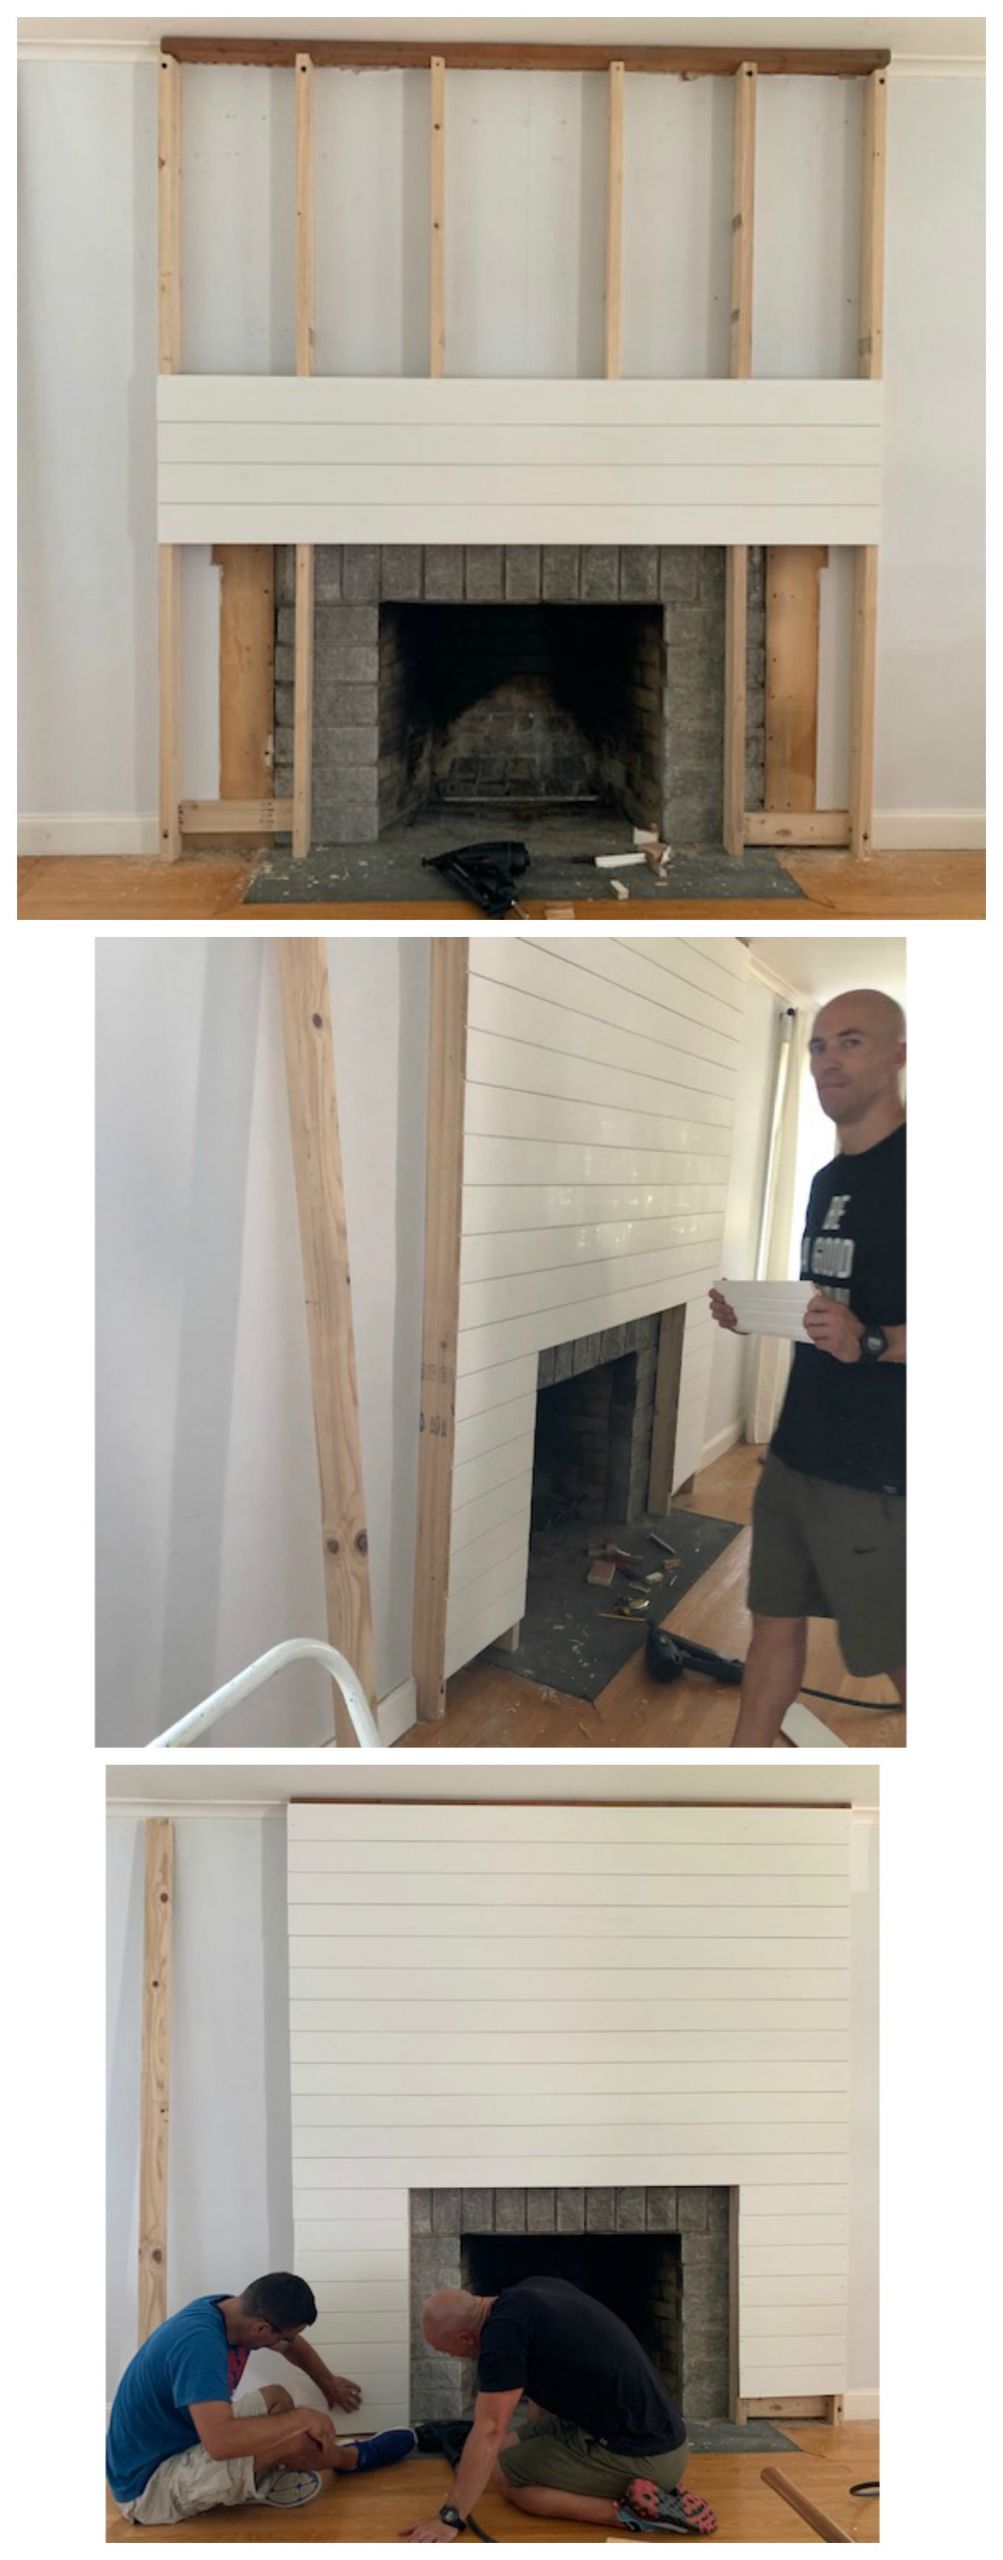 Diy Fireplace Surround Ideas Unique Shiplap Fireplace and Diy Mantle Ditched the Old